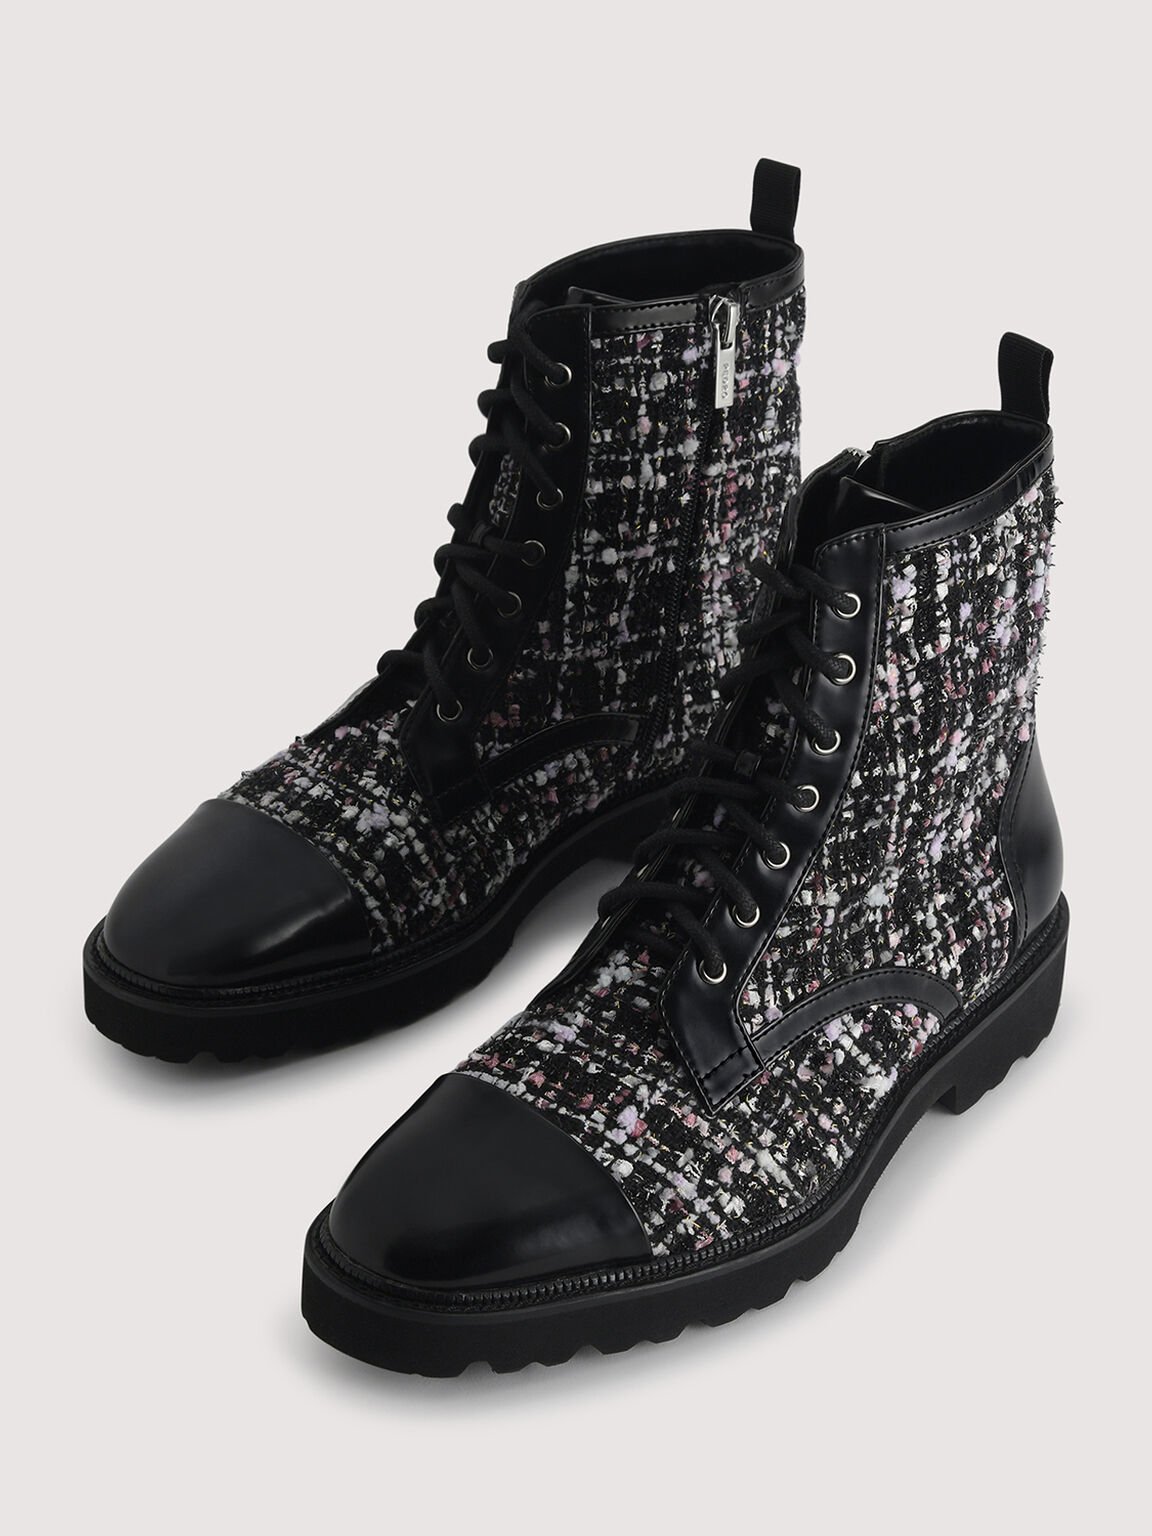 Tweed Lace Up Boots, Black